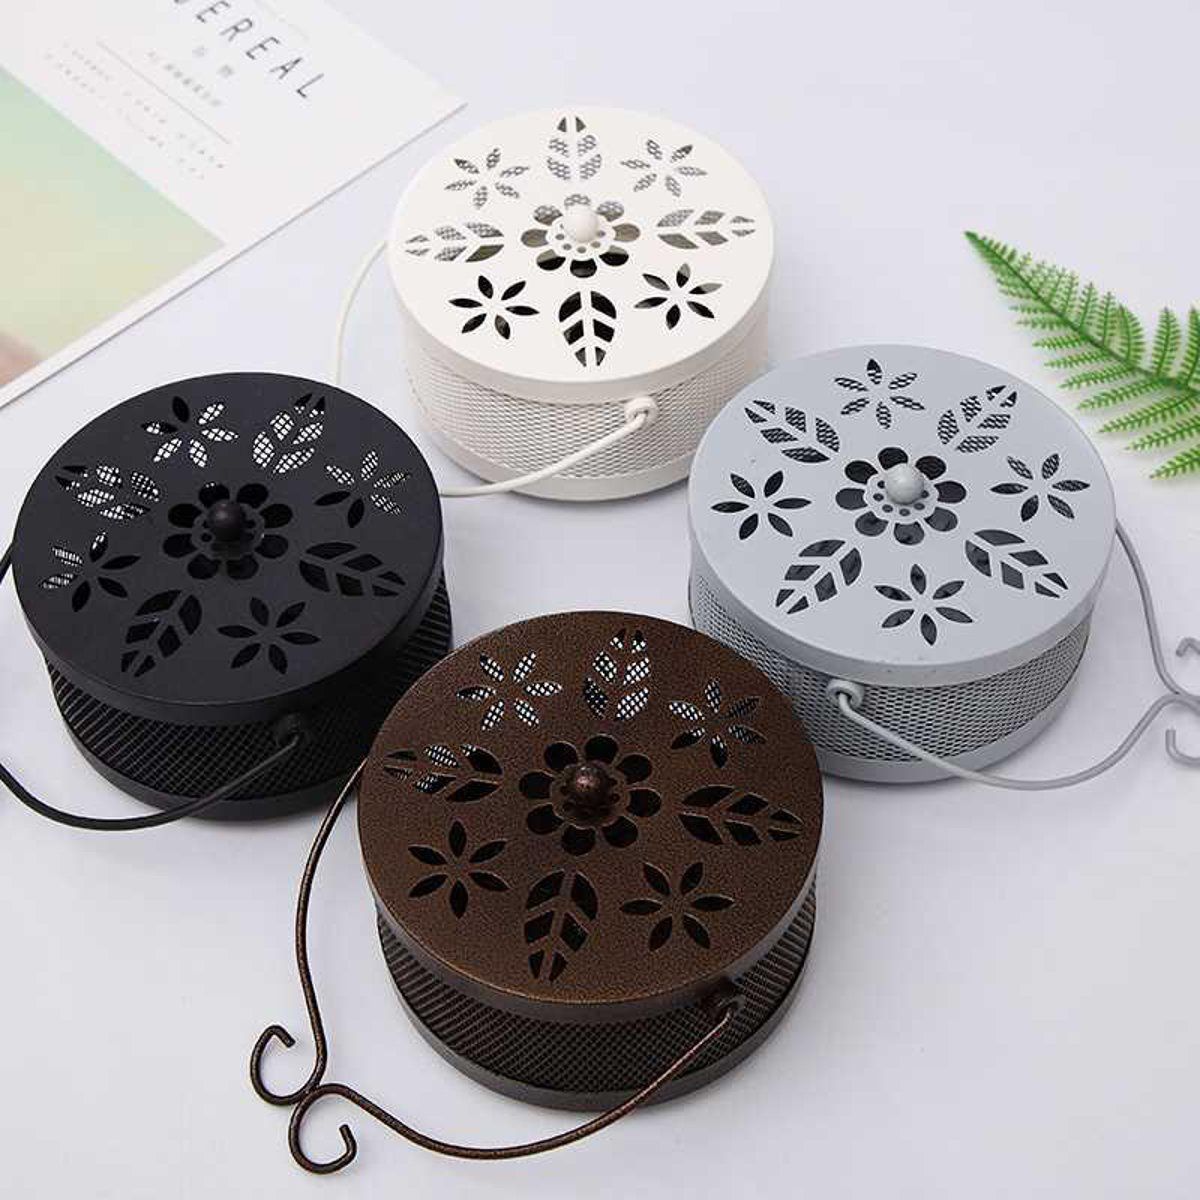 Hollow-Iron-Mosquito-Incense-Box-Sandalwood-Furnace-Repellent-Holder-Coil-Burner-1606266